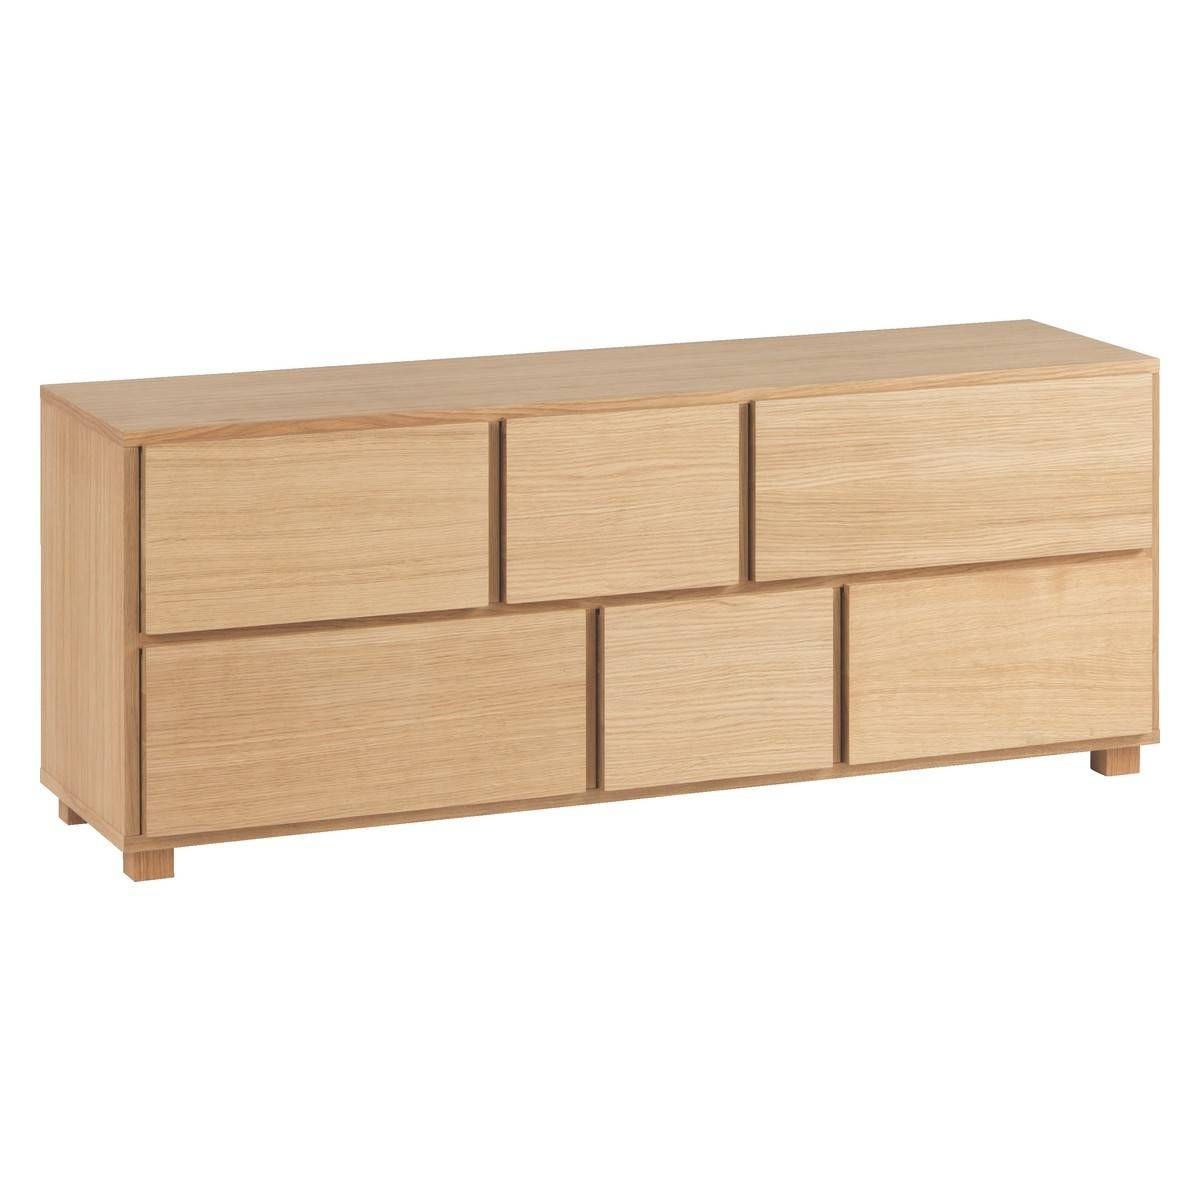 Hana Ii Oiled Oak 6 Drawer Low Wide Chest | Buy Now At Habitat Uk Intended For Low Wooden Sideboards (View 2 of 15)